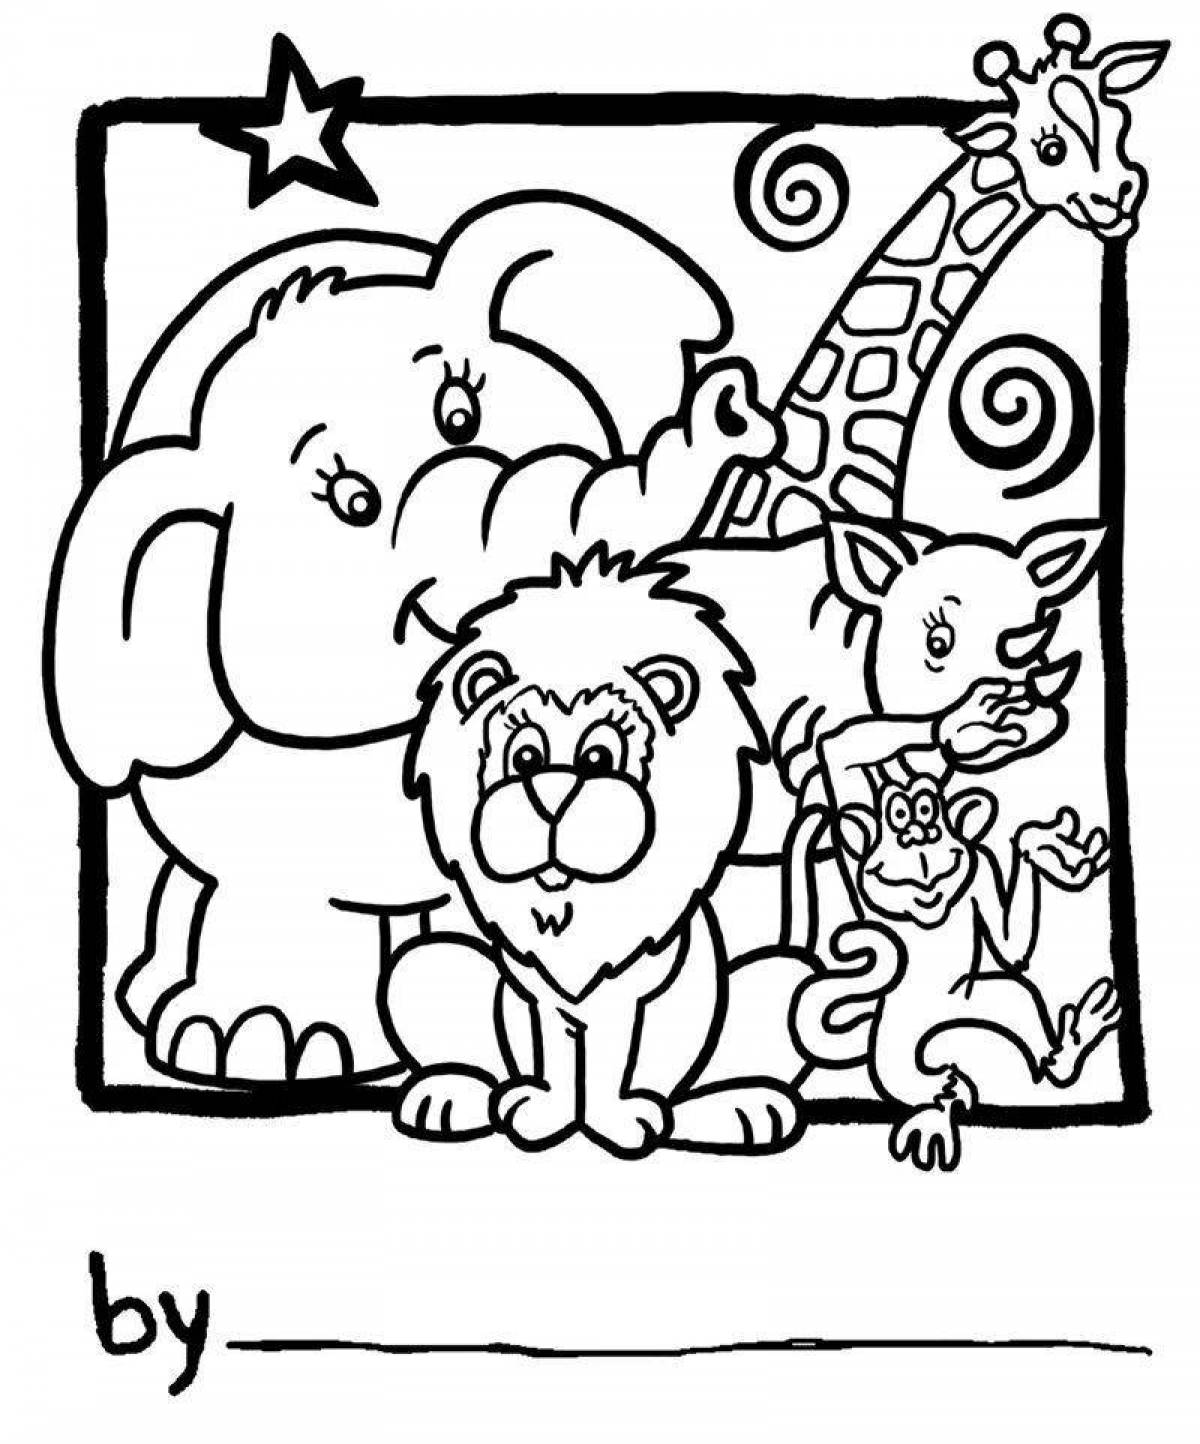 Outstanding zoo coloring book for kids